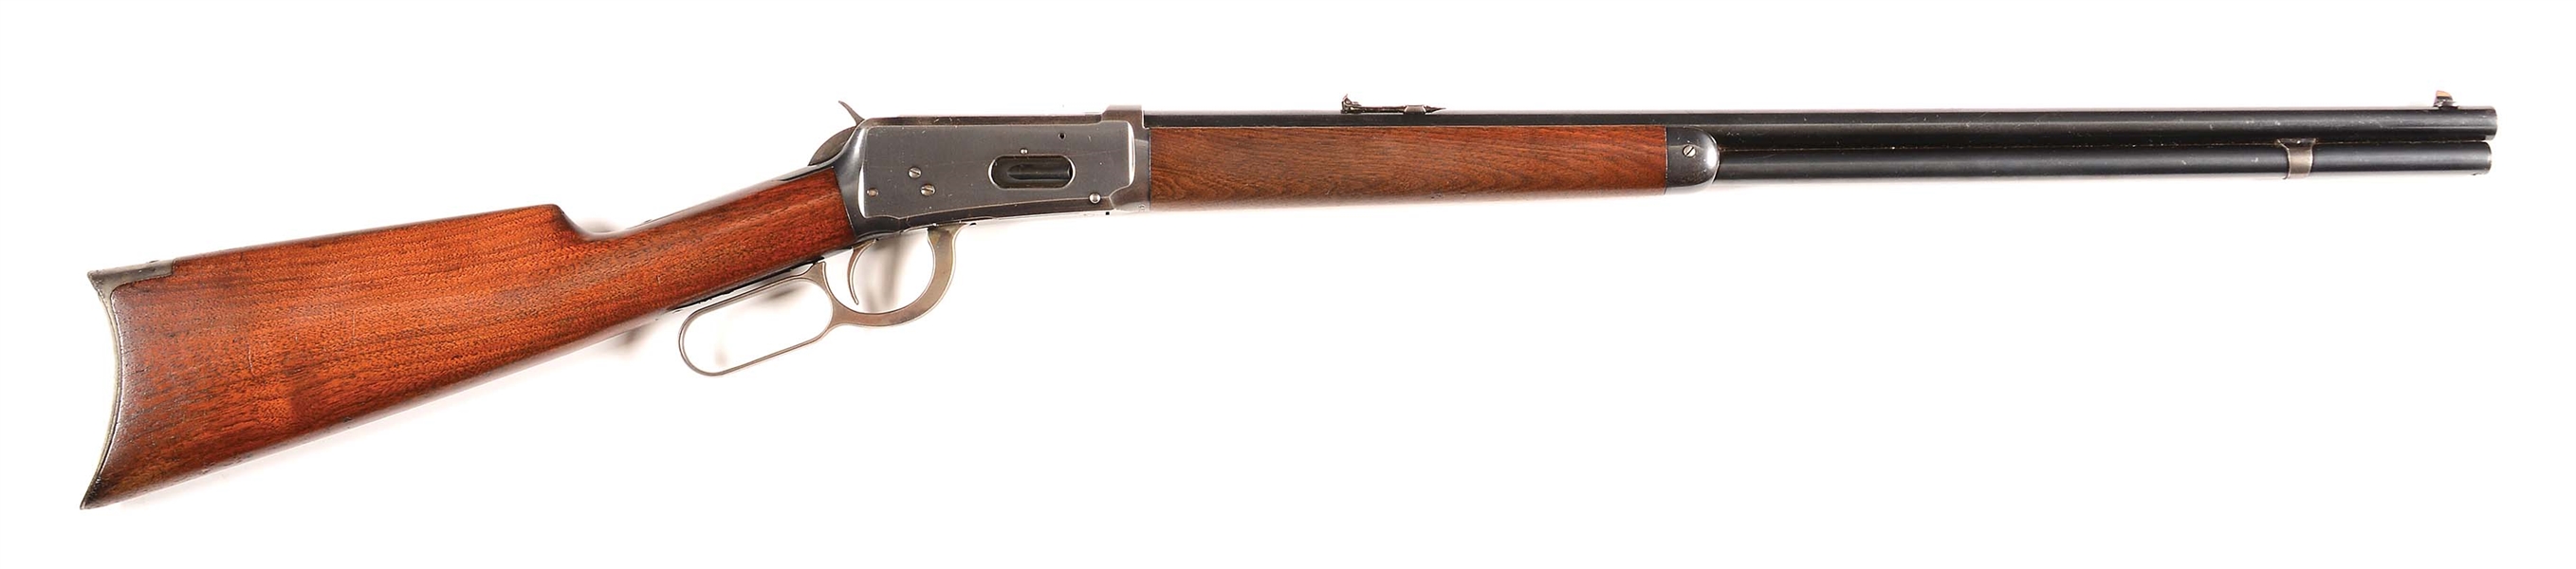 (C) WINCHESTER MODEL 1894 LEVER ACTION RIFLE WITH FACTORY LETTER (1911).